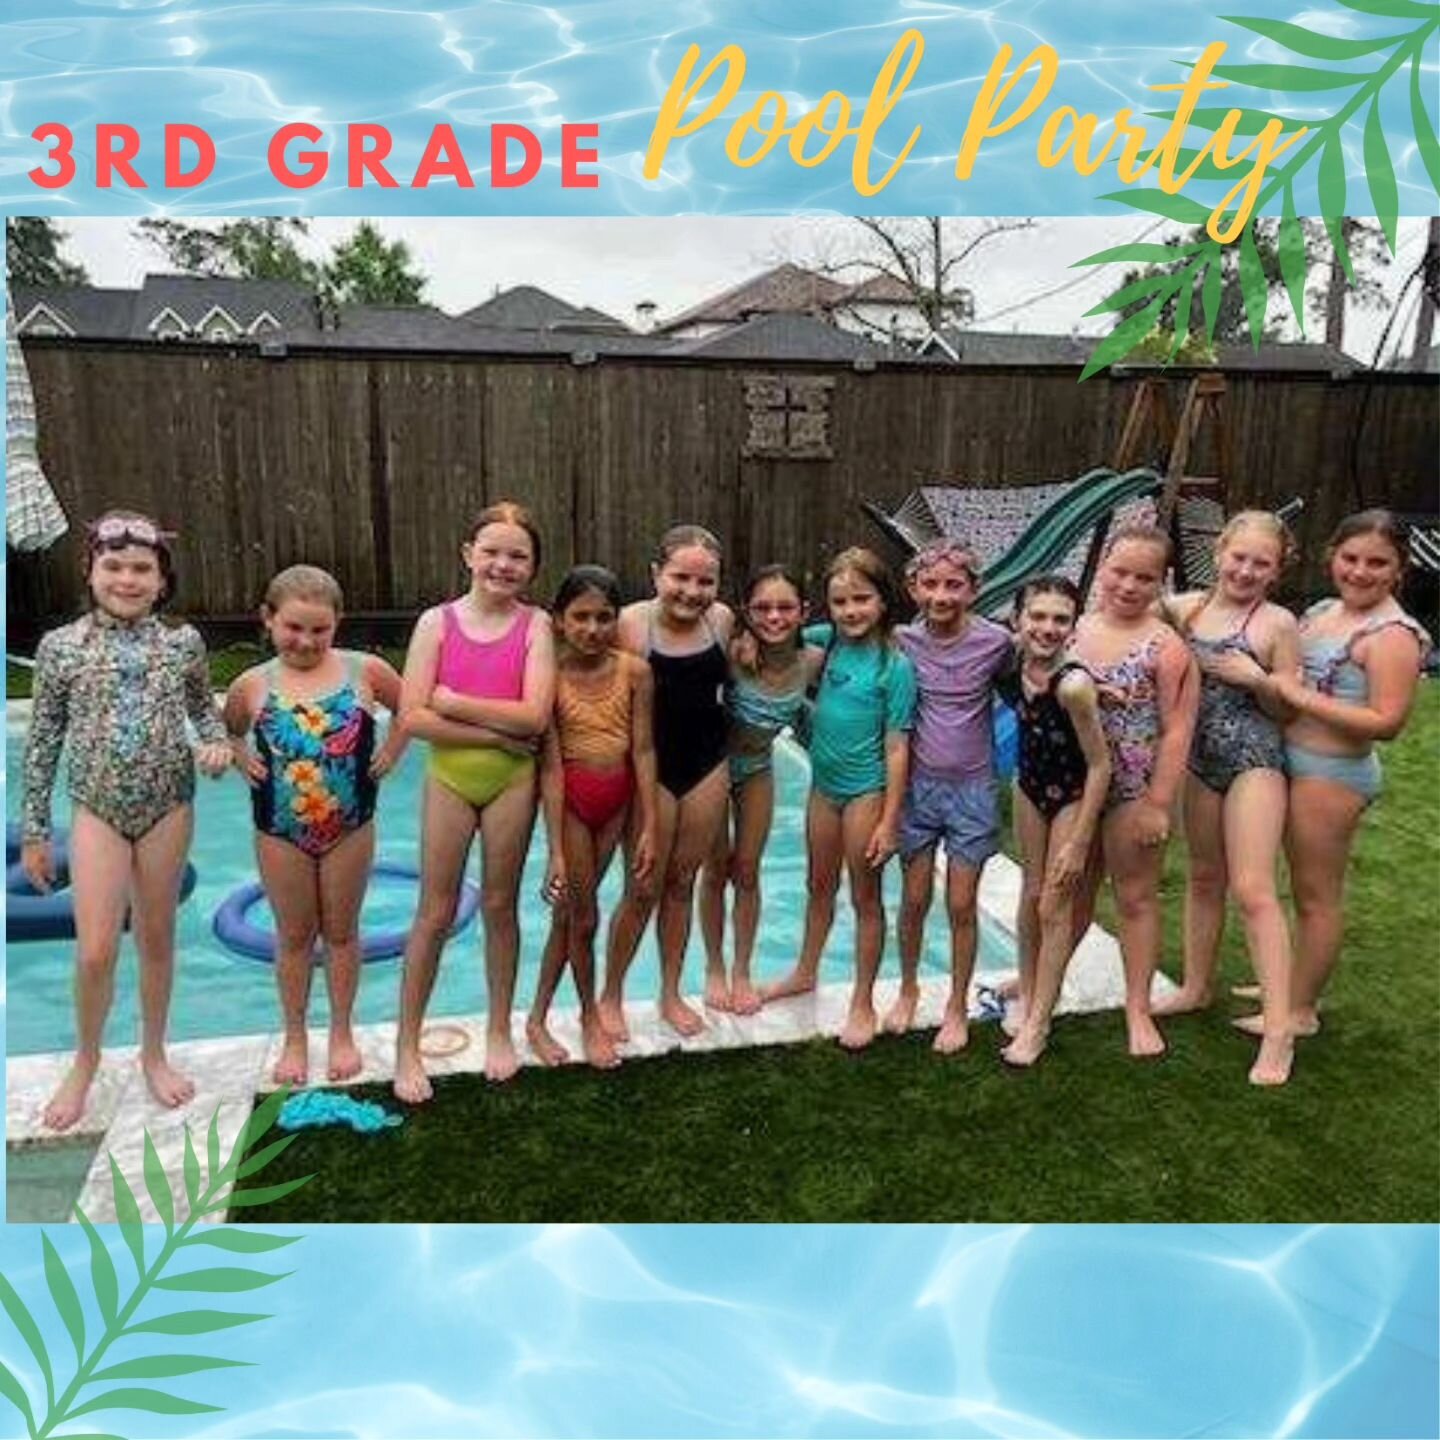 ☀We continue our Eagle Evening Socials 🎉 Thanks to the Ferrarese family for hosting the 3rd grade girls pool party!